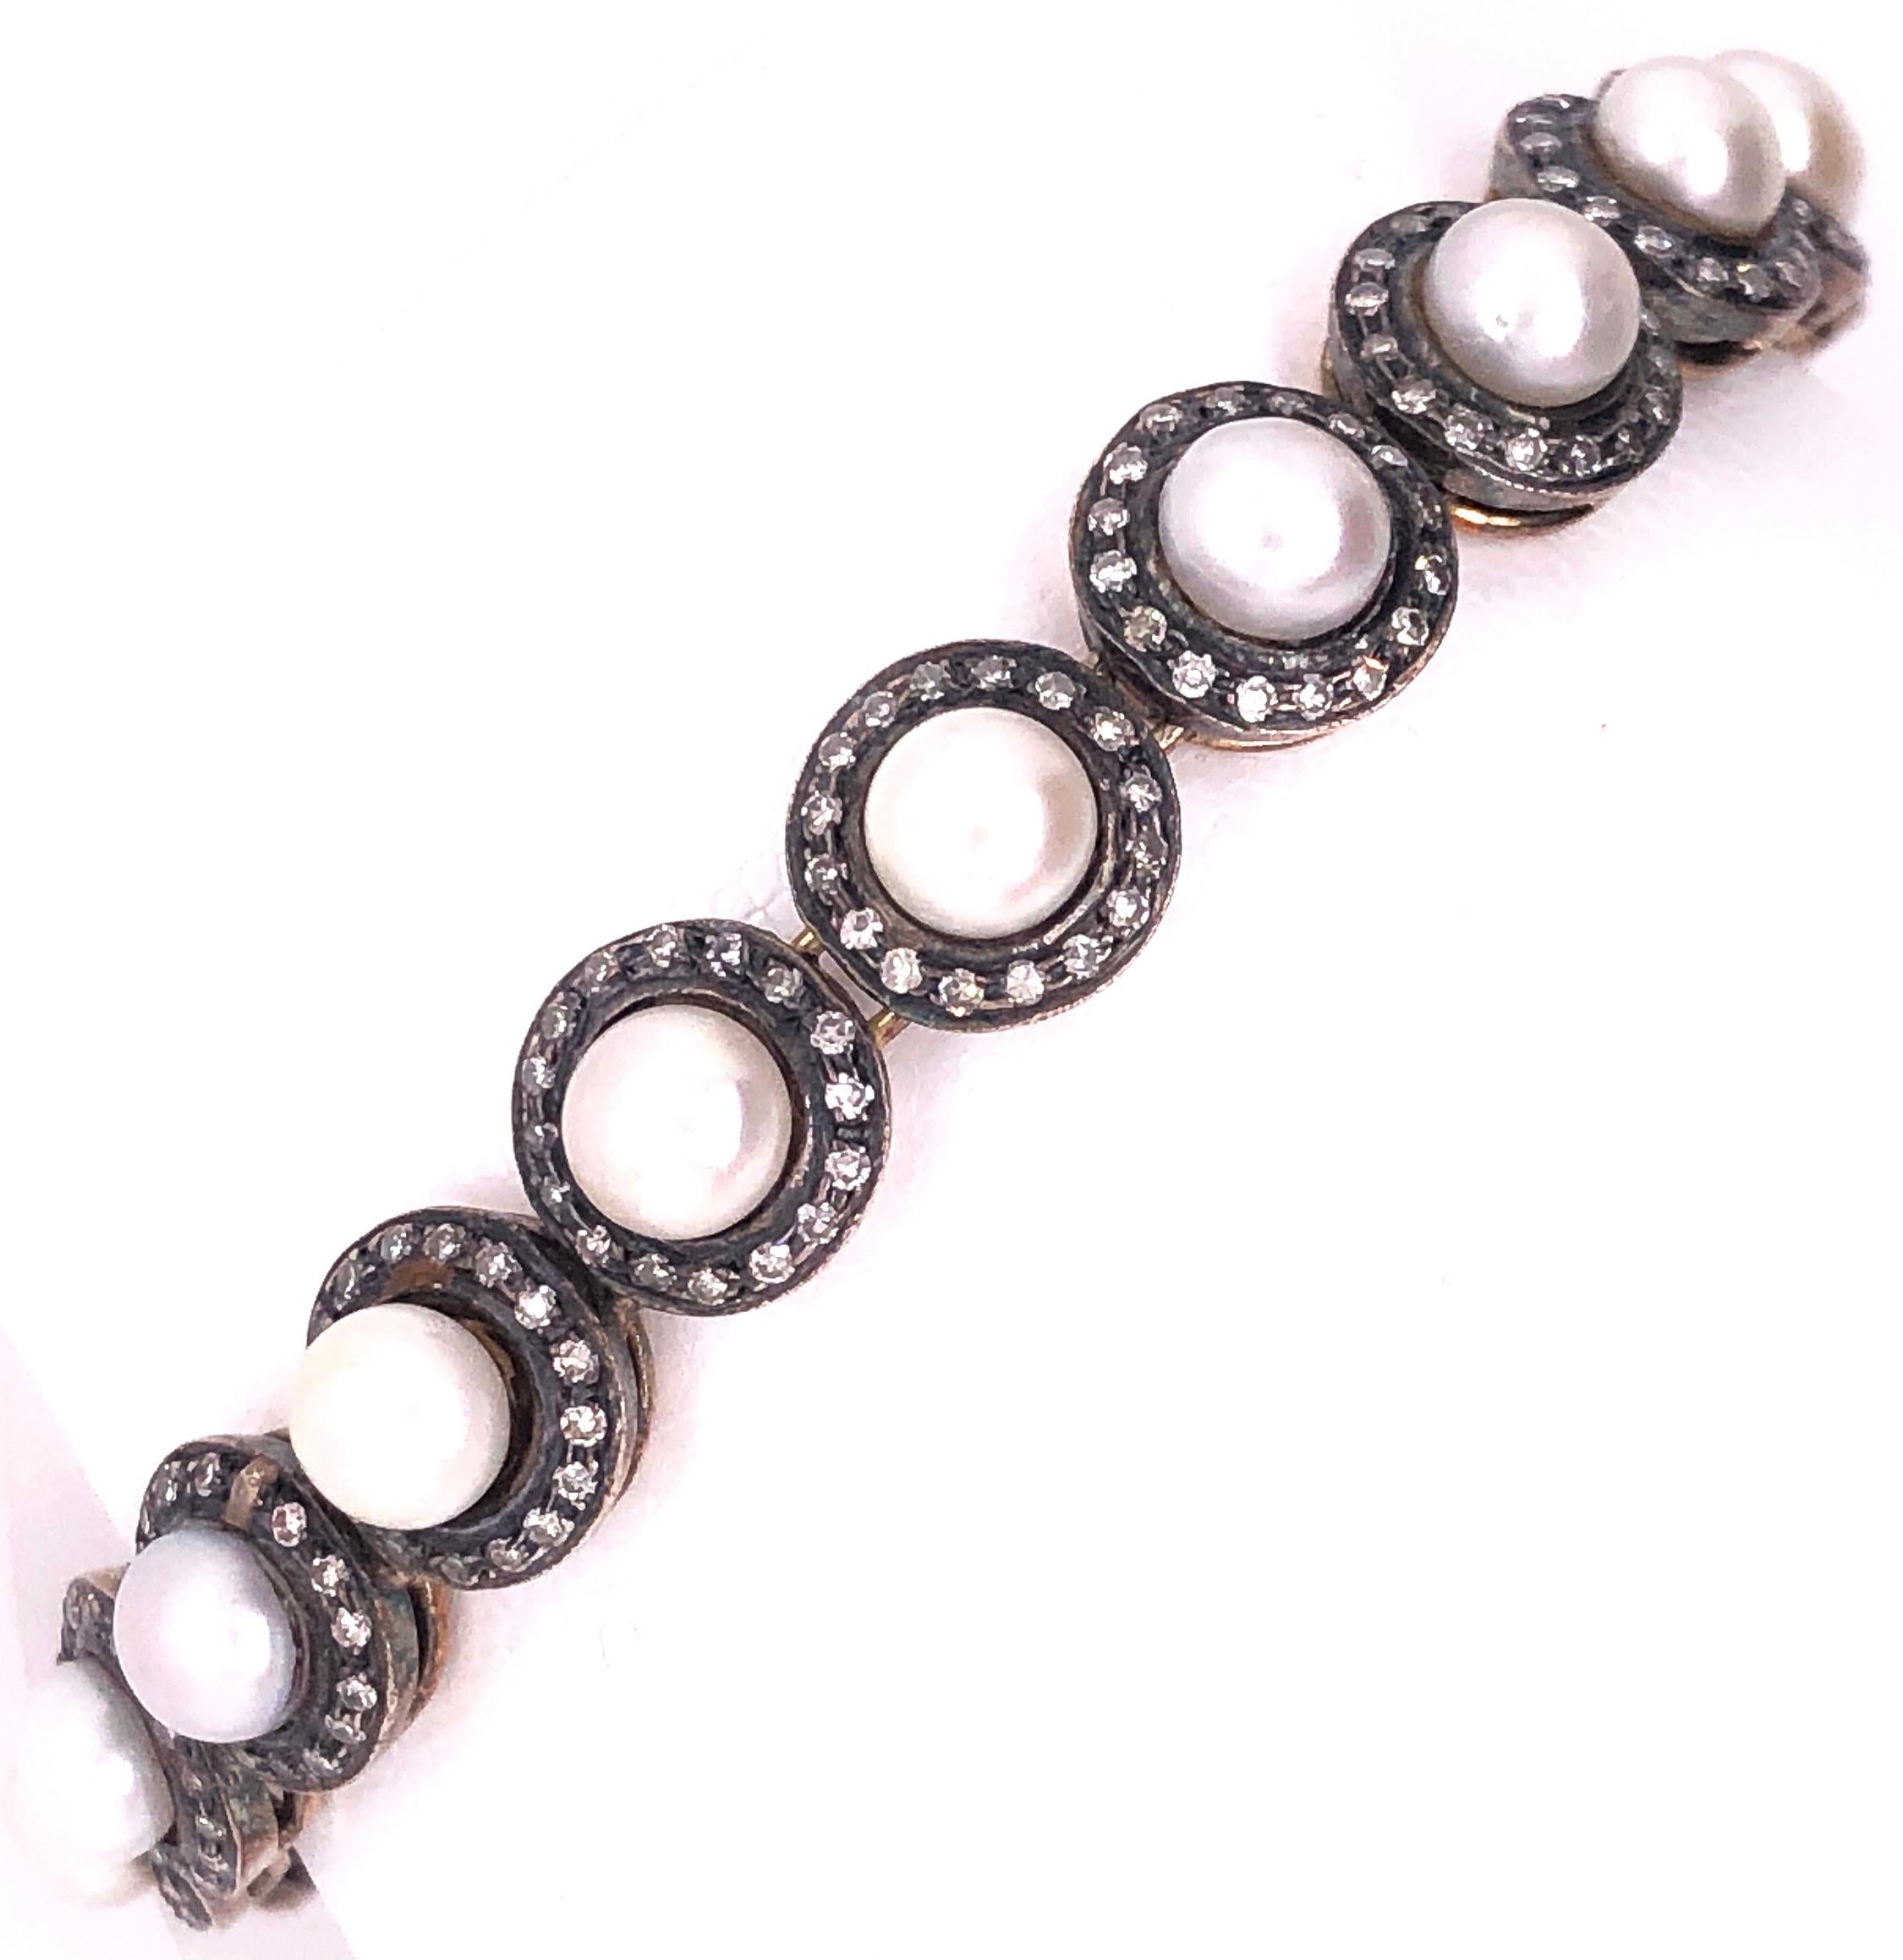 18 Karat Diamond & Pearl 7 Inch Bracelet Fine Estate Jewelry Designed as an articulated line of 19, 5.60mm to 6.0mm pearls flanked by 17, .75 diamonds for a total diamond weight of 2.4 Carats. 24.3 grams total weight.
Provenance:
A NYC Socialite